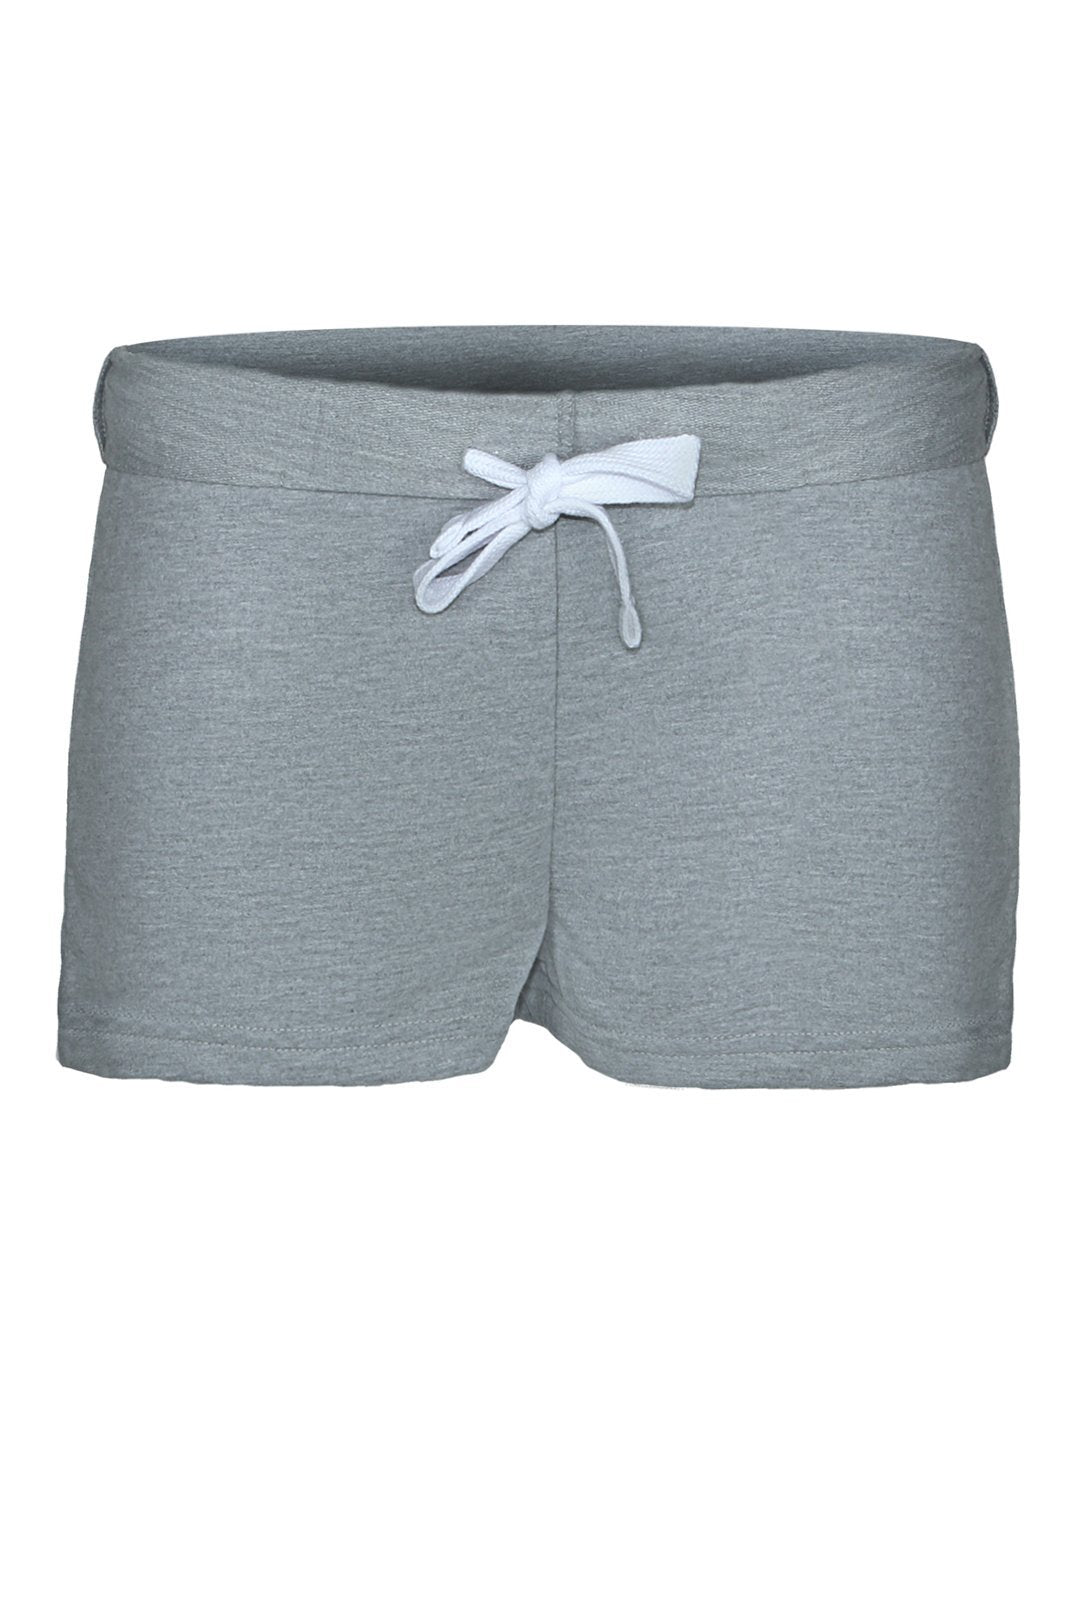 hill & dale mini short bottoms hill & dale grey marl XS 50% Cotton 50% Polyester